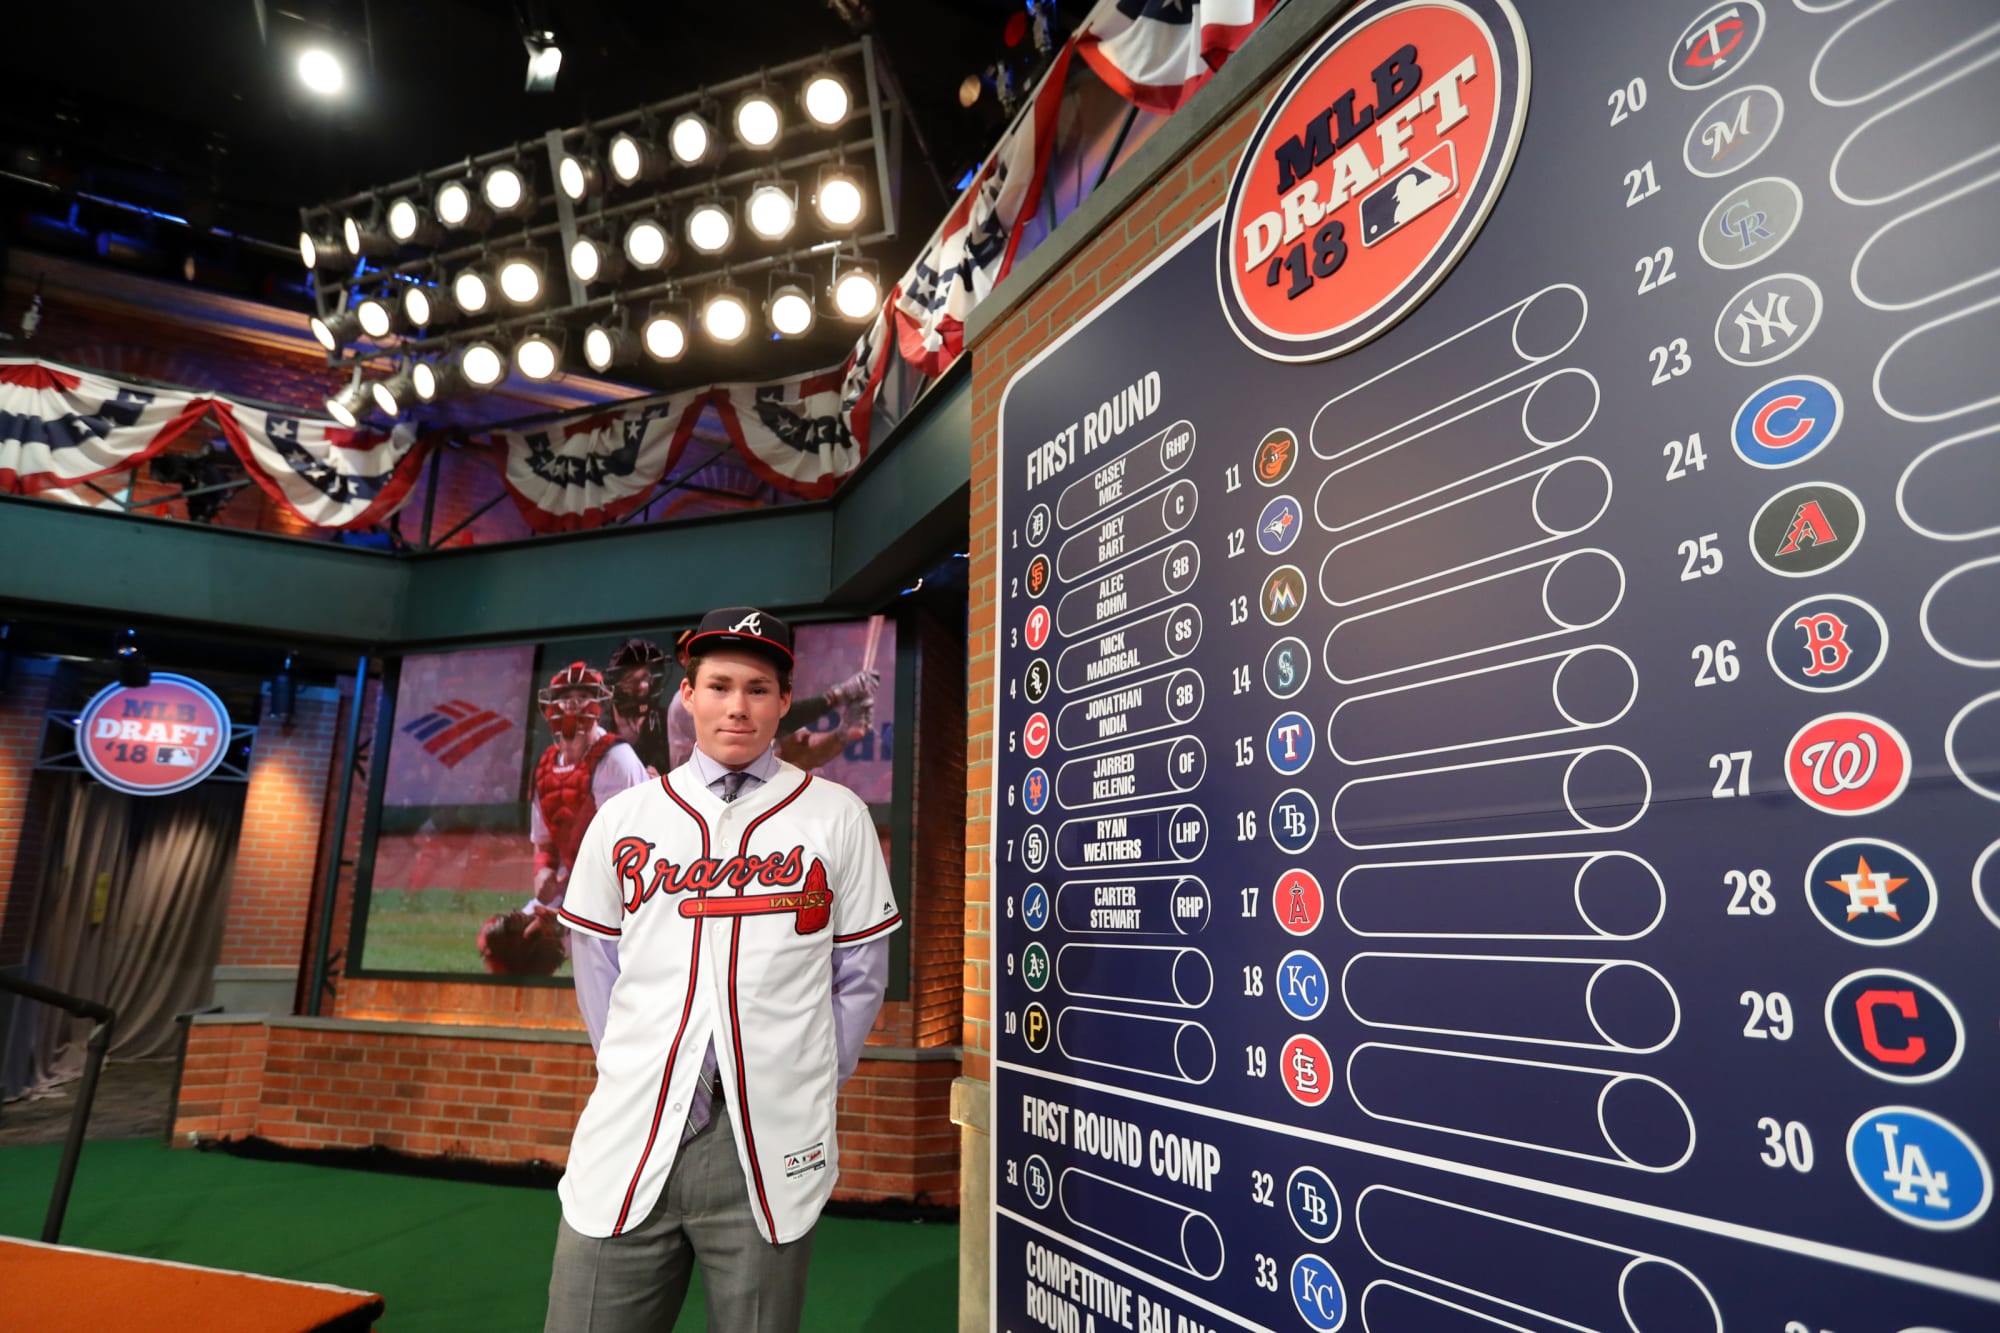 MLBPA Files Grievance for Braves Draft Pick Carter Stewart to Be